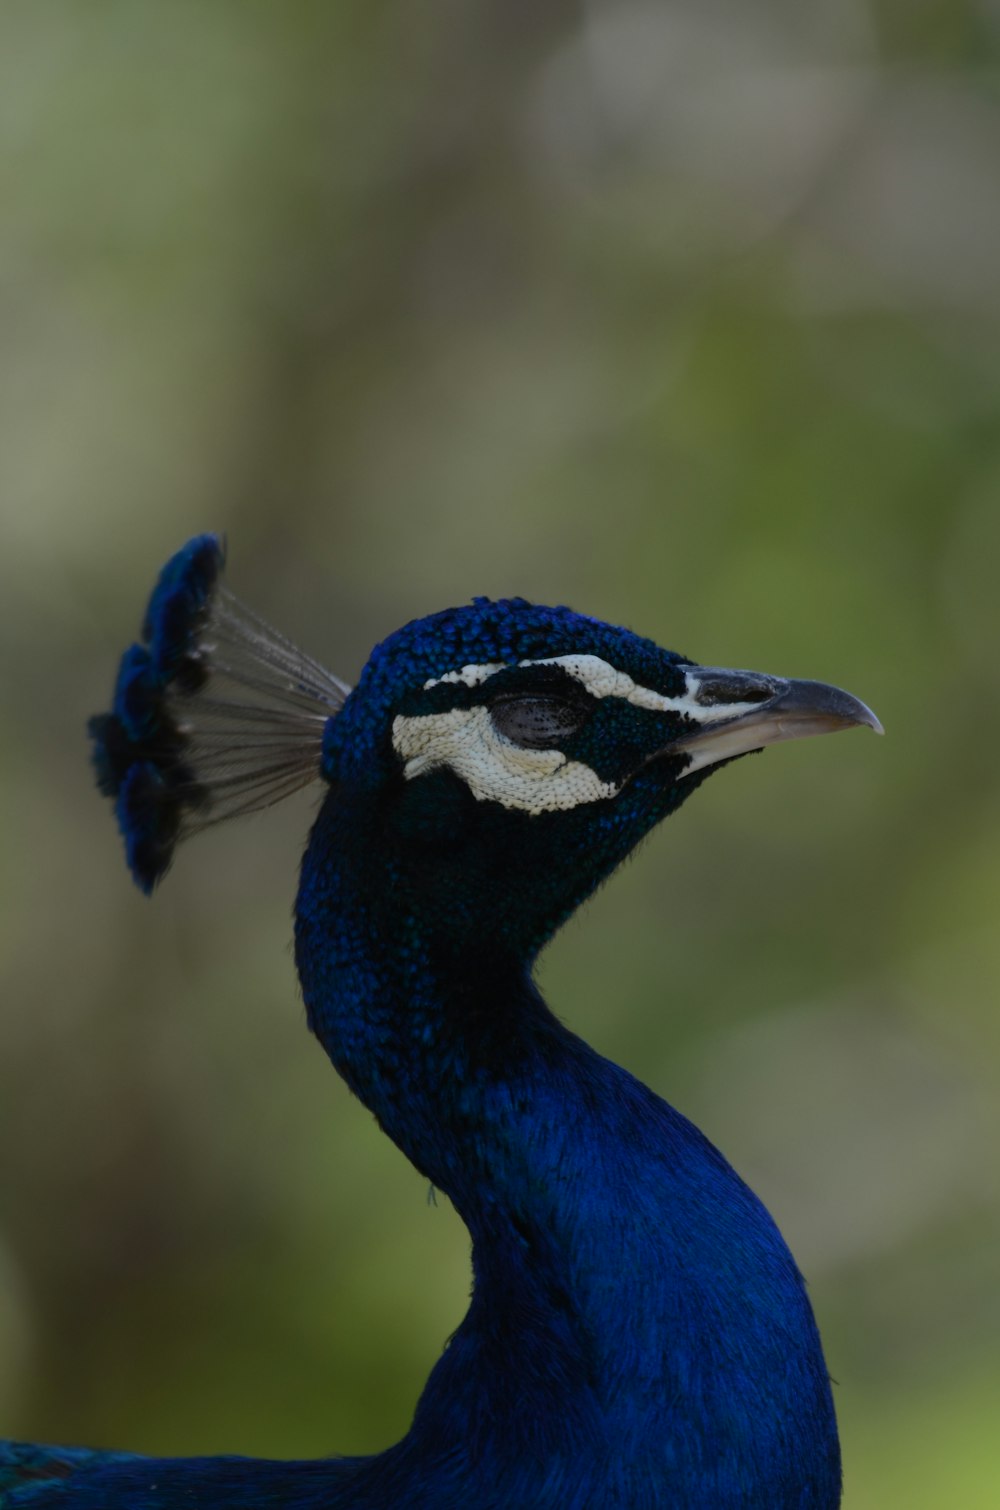 blue peacock with crest on head